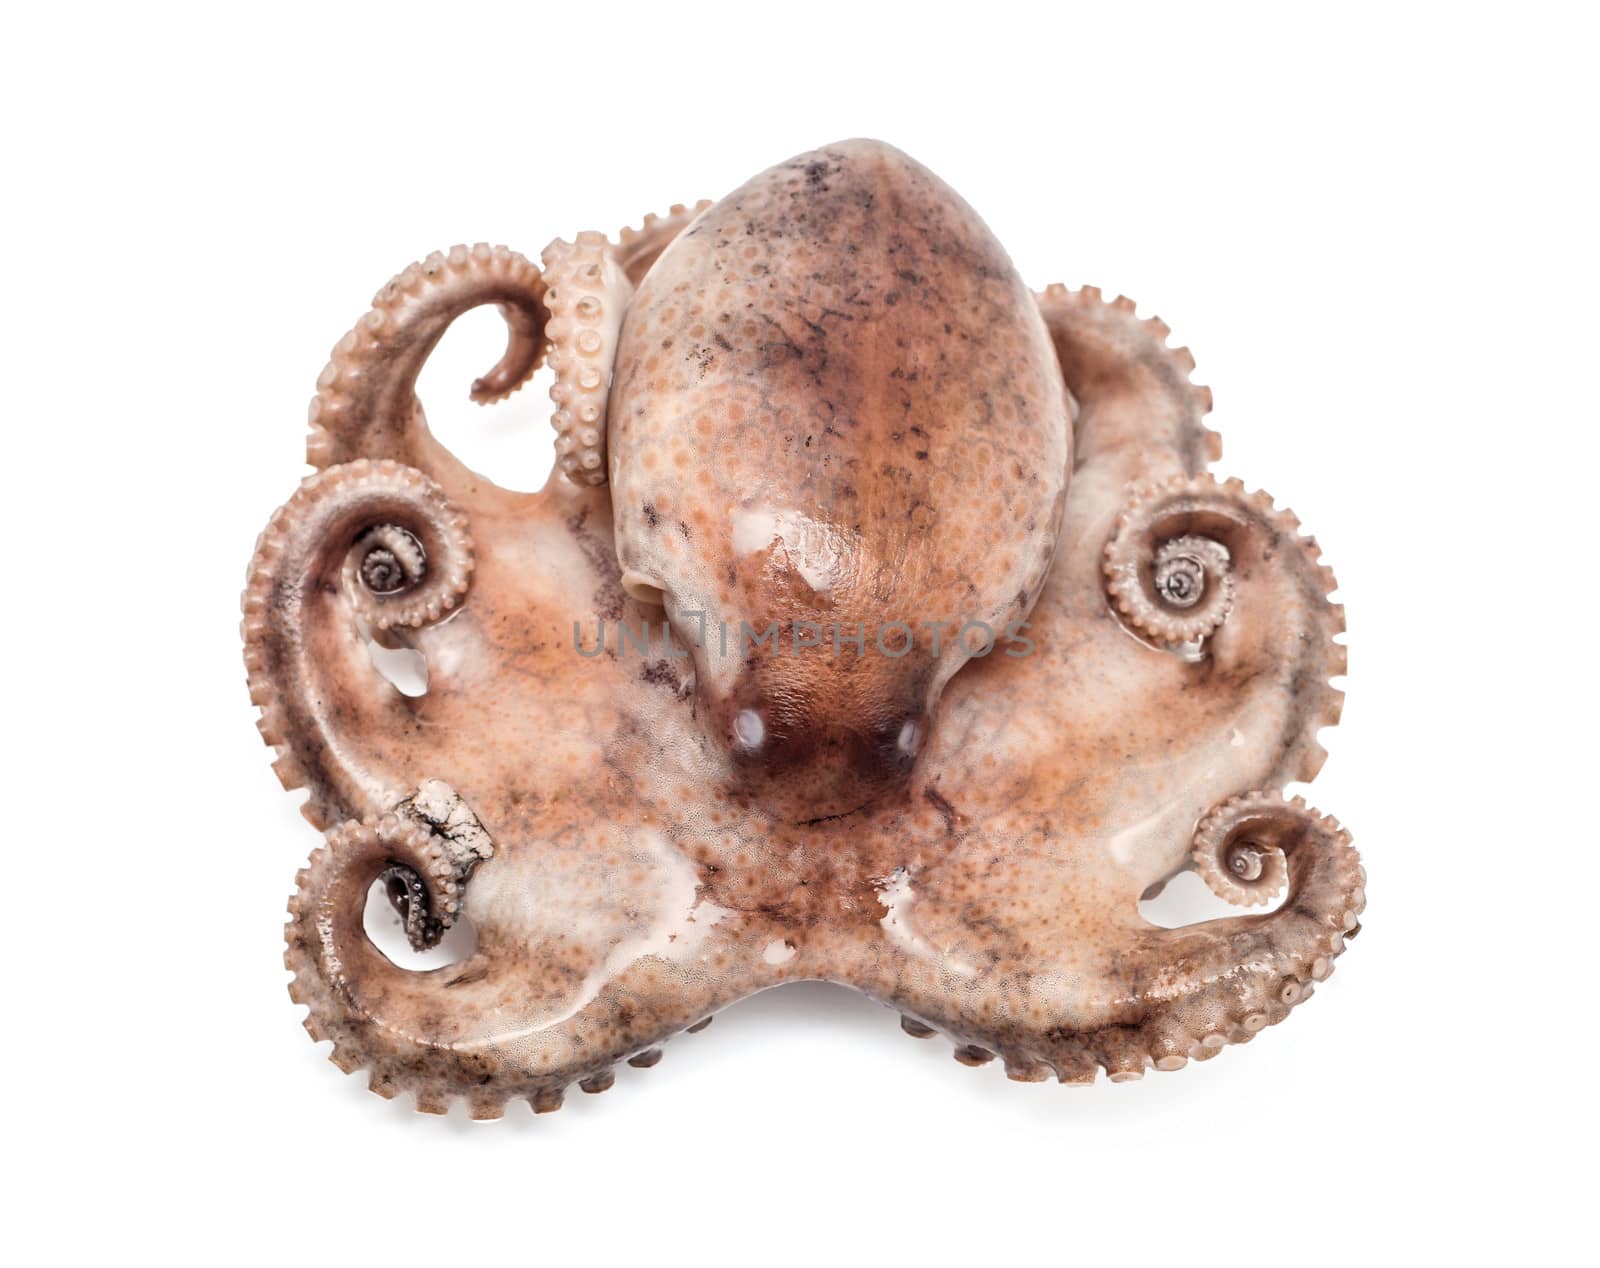 Small octopus isolated on white background by kefiiir